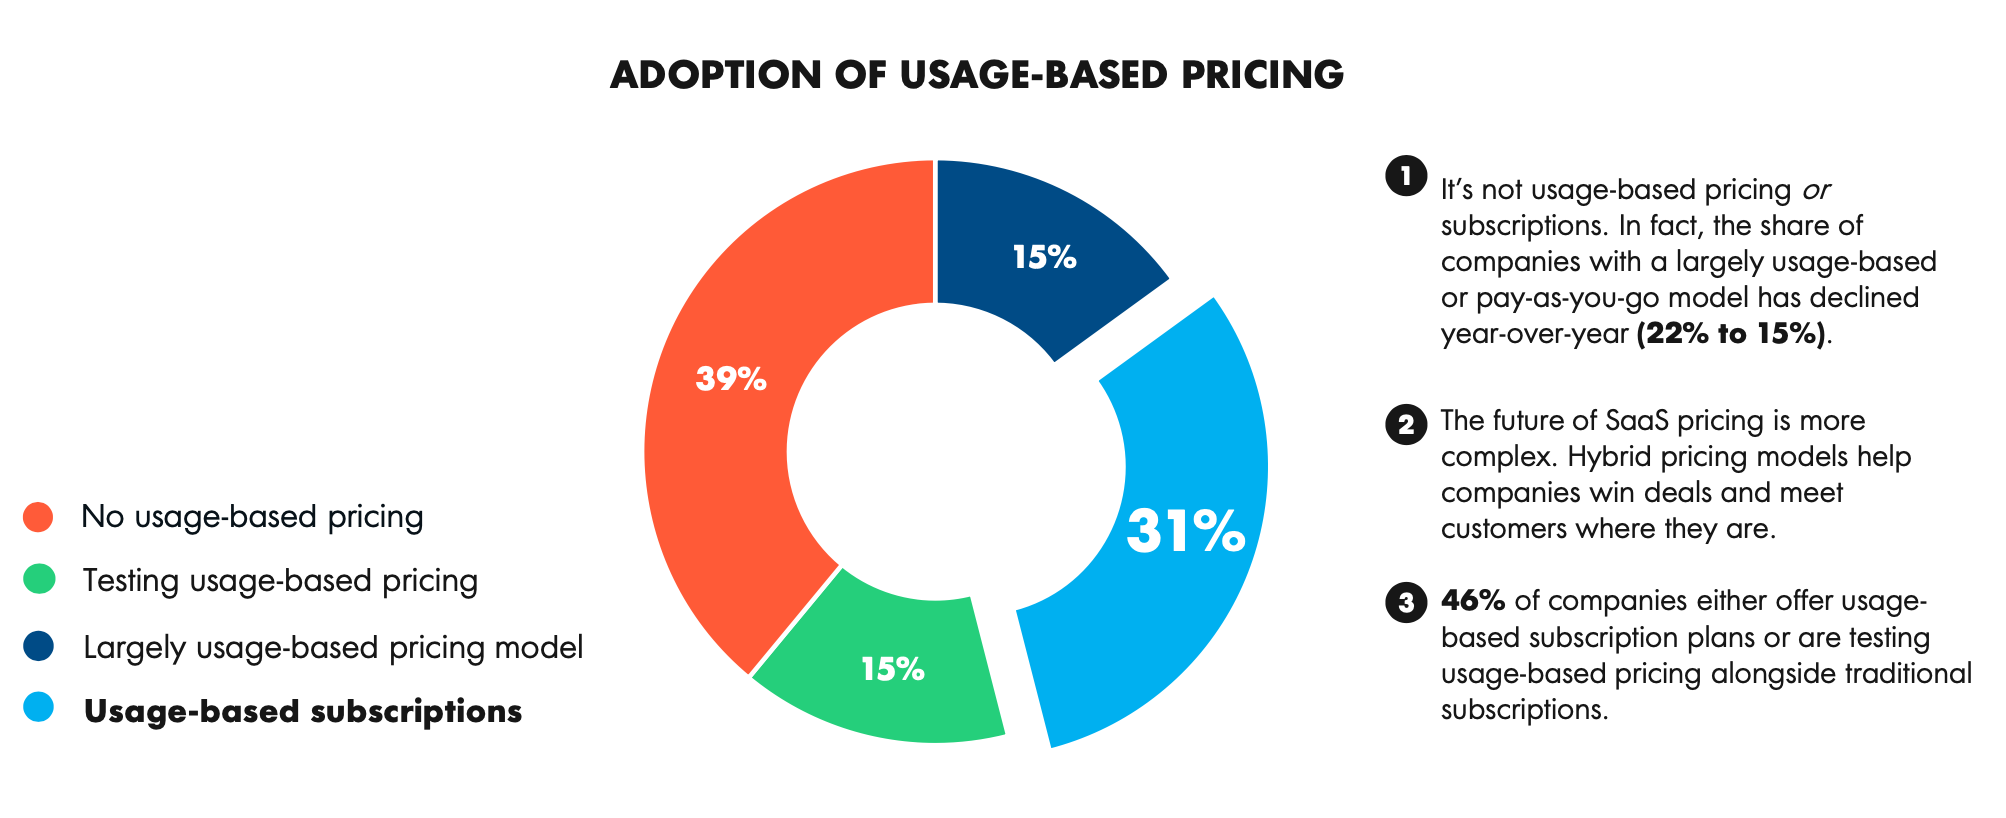 Adoption of usage-based pricing subscriptions